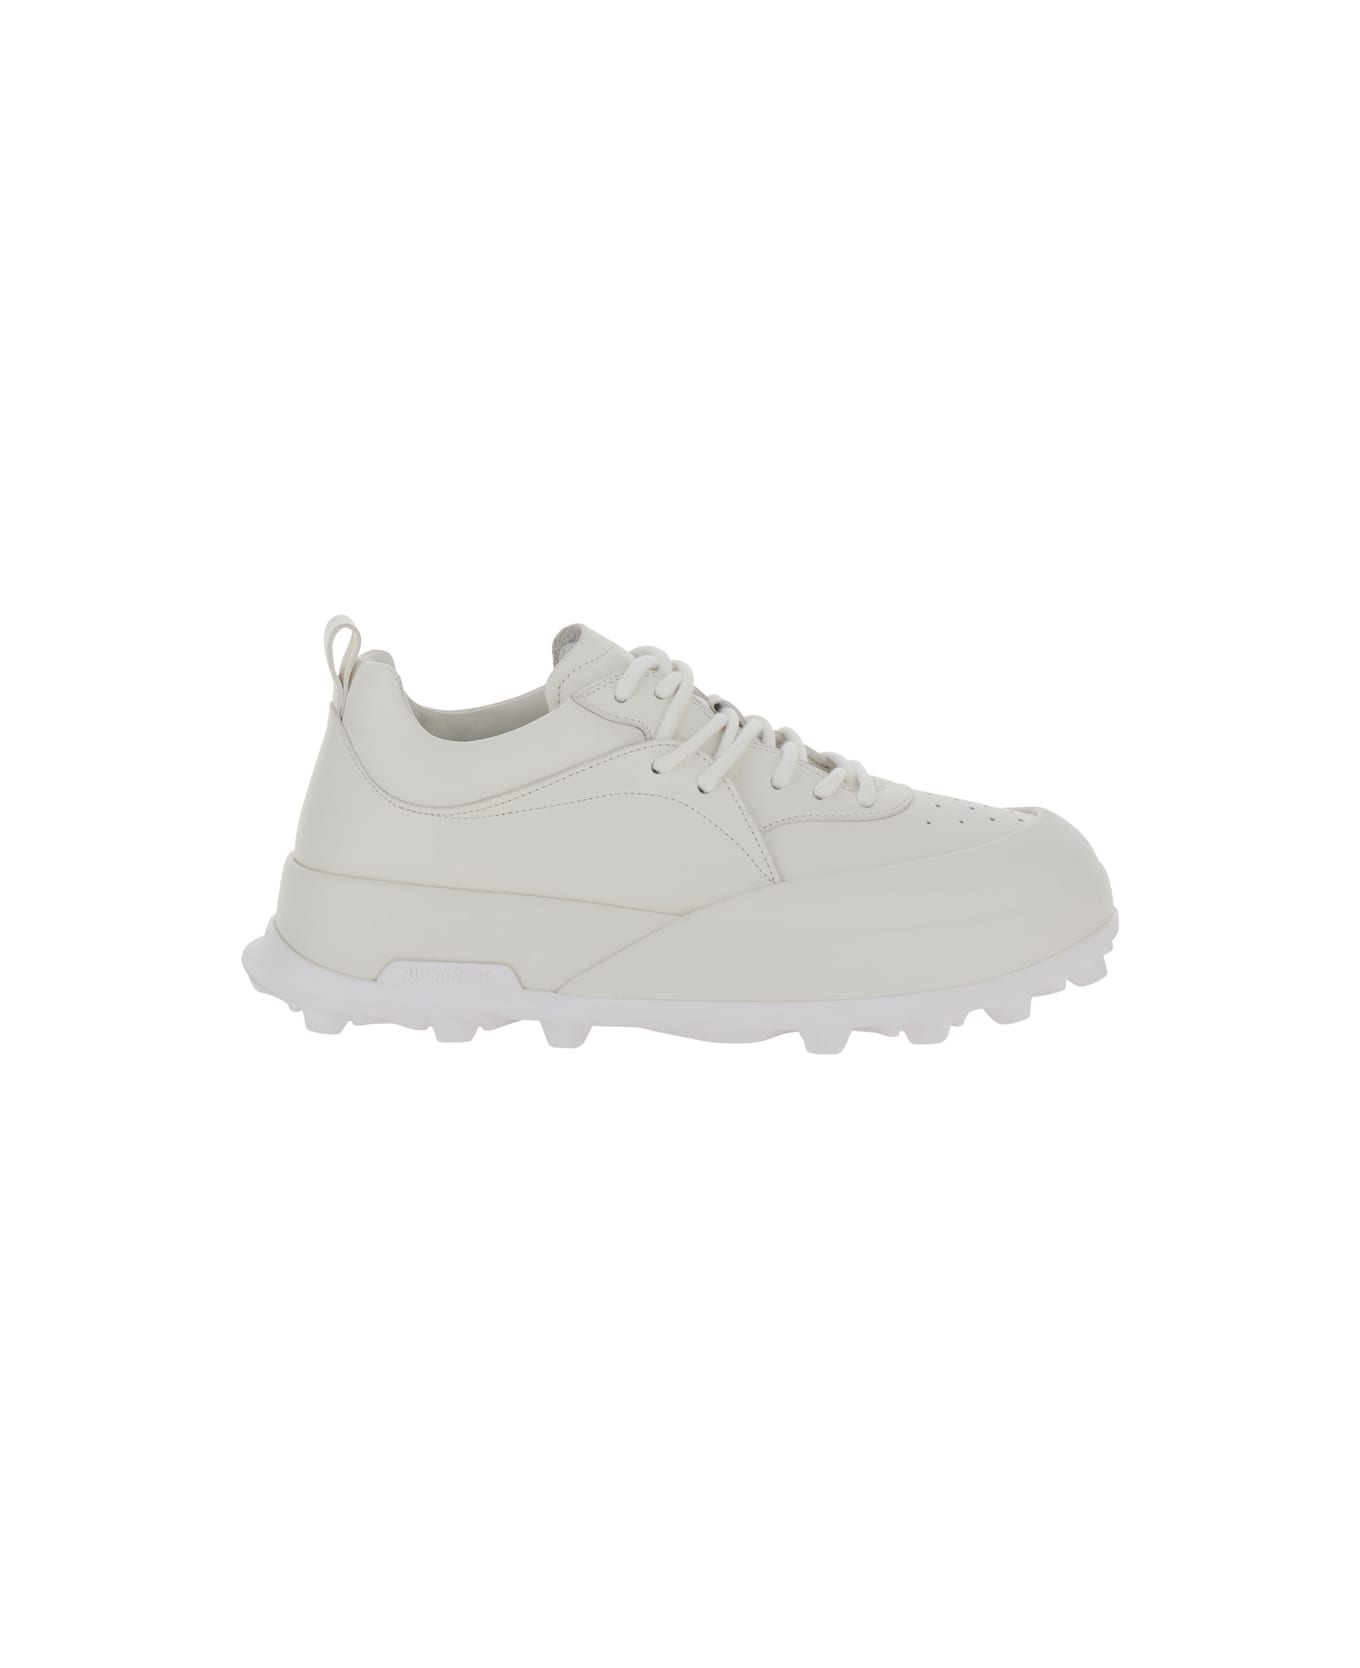 Jil Sander 'orb' White Low Top Sneakers With Cleated Sole In Leather Man - White